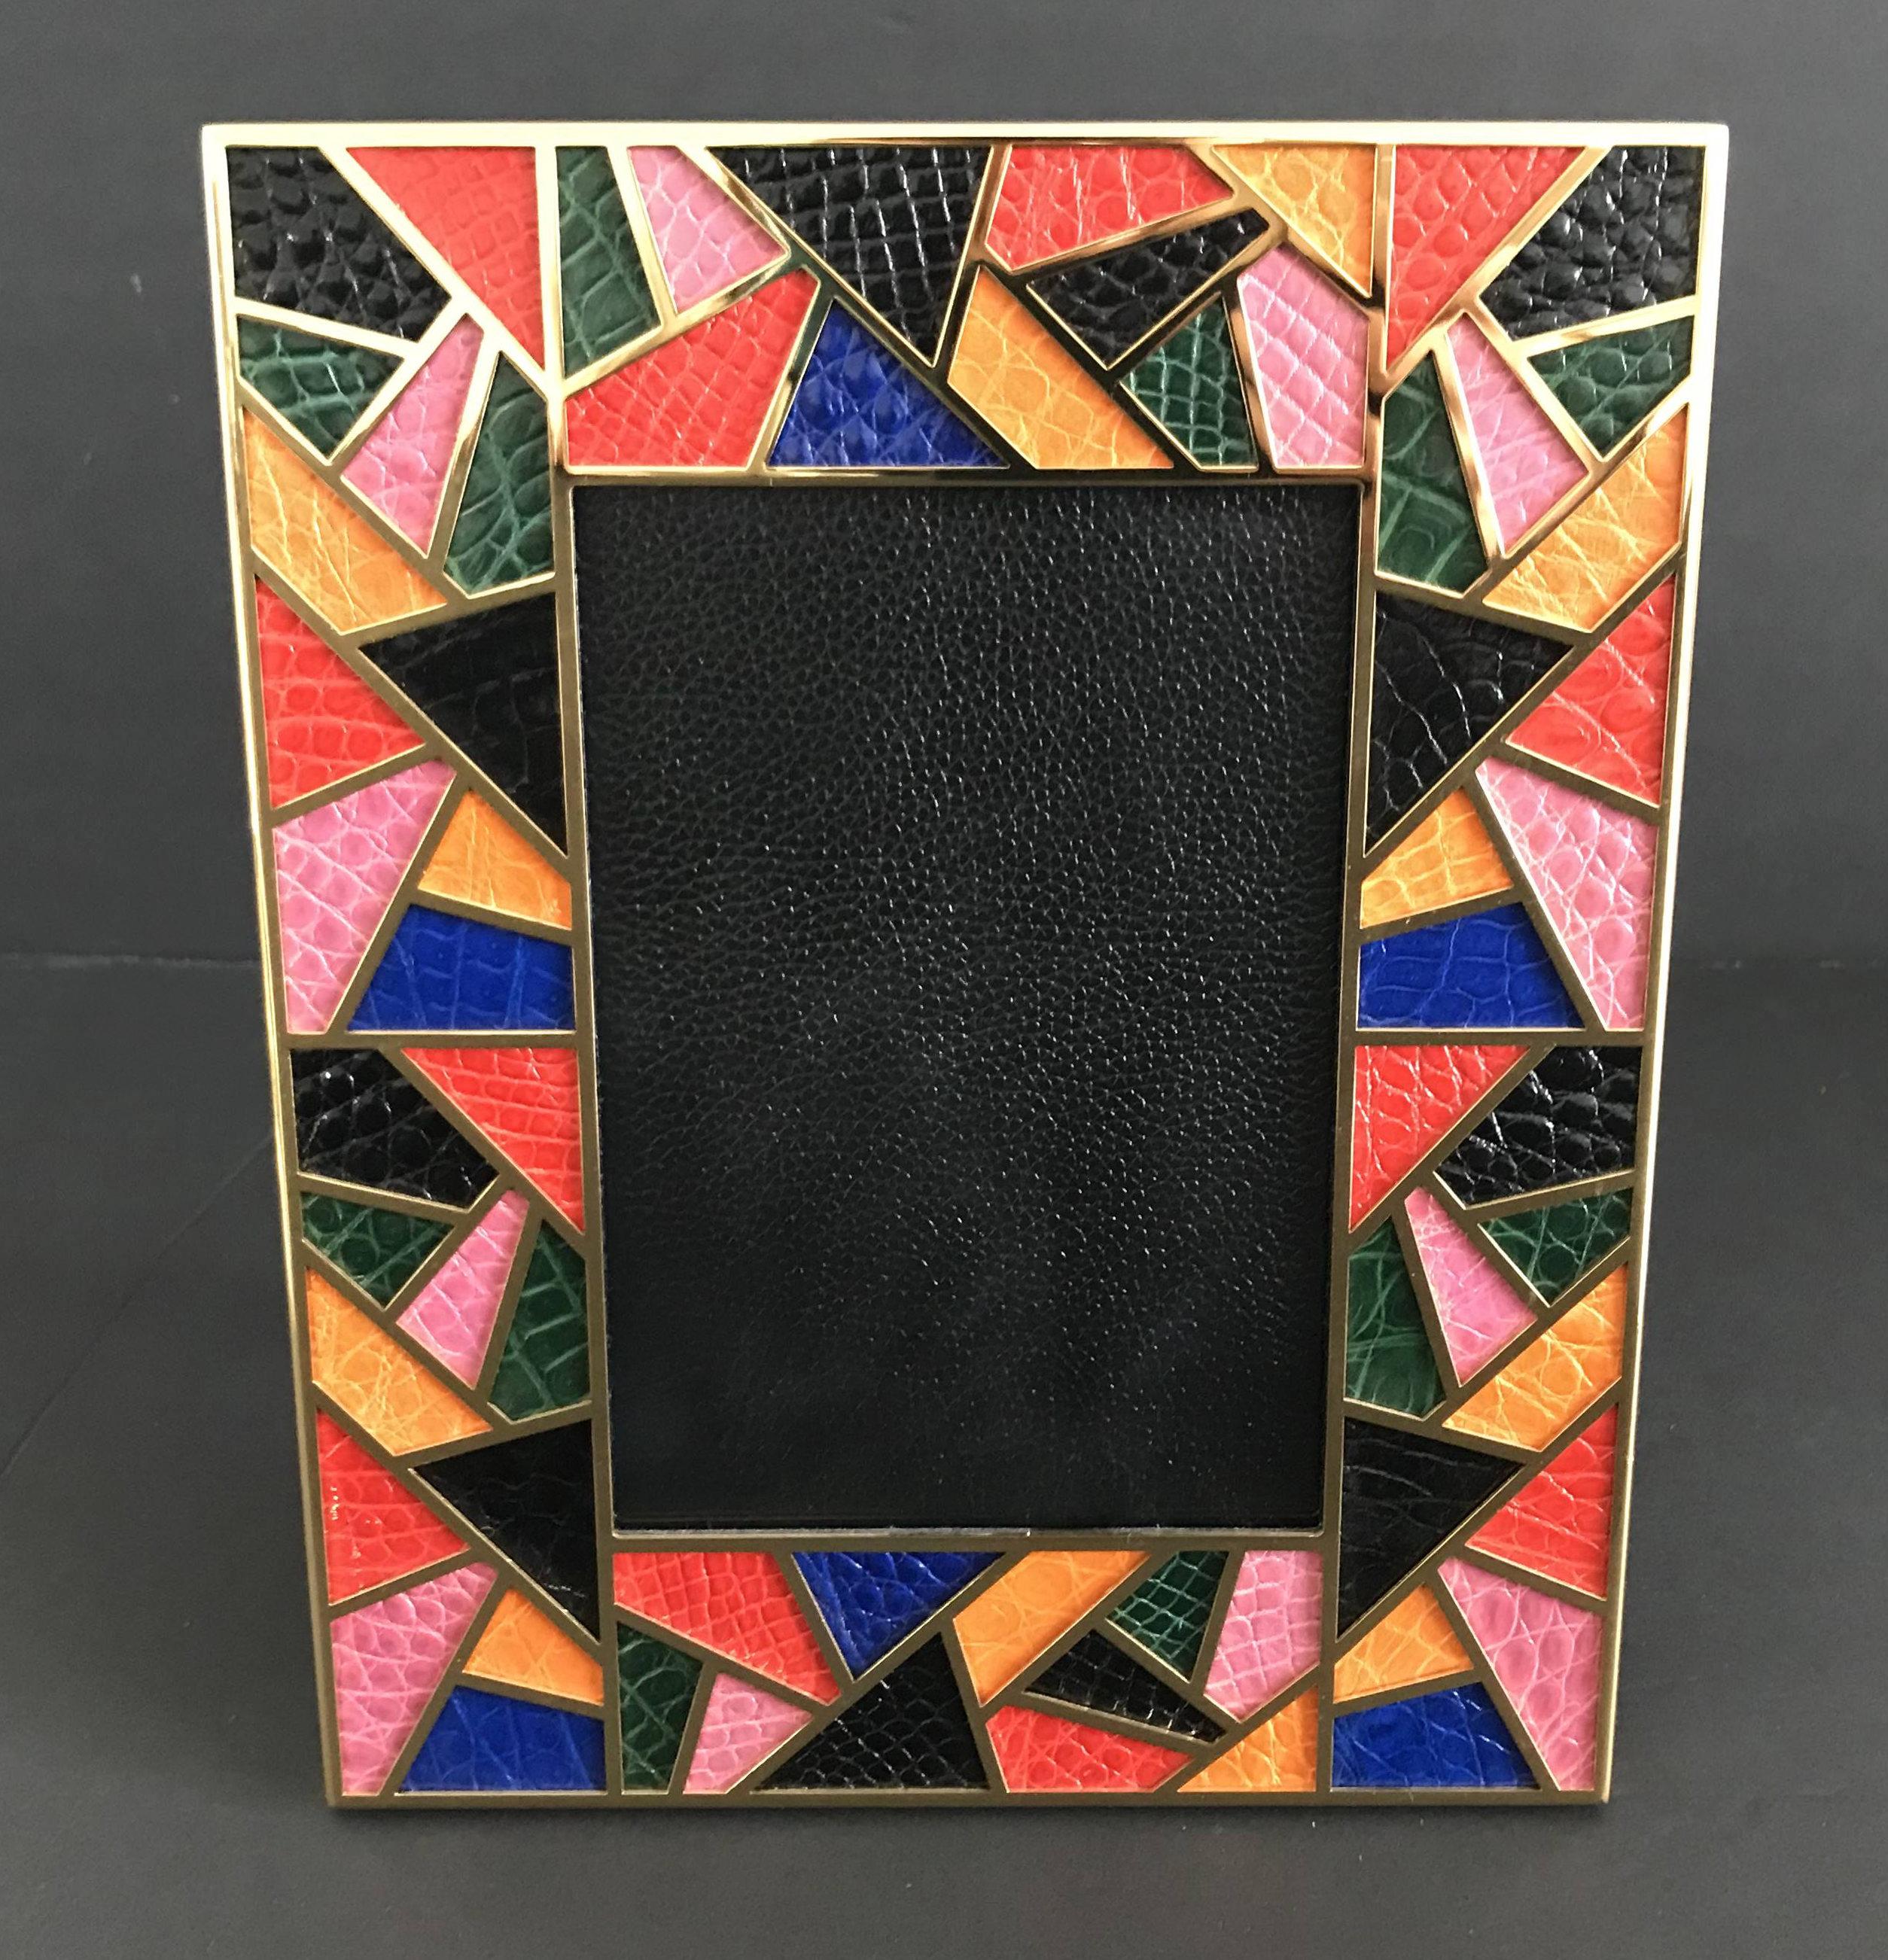 Multi-color crocodile leather and gold-plated picture frame by Fabio Ltd
Height: 10.5 inches / Width: 8.5 inches / Depth: 1 inch
Photo size: 5 inches by 7 inches
LAST 1 in stock in Los Angeles
Order Reference #: FABIOLTD PF30
This piece makes for